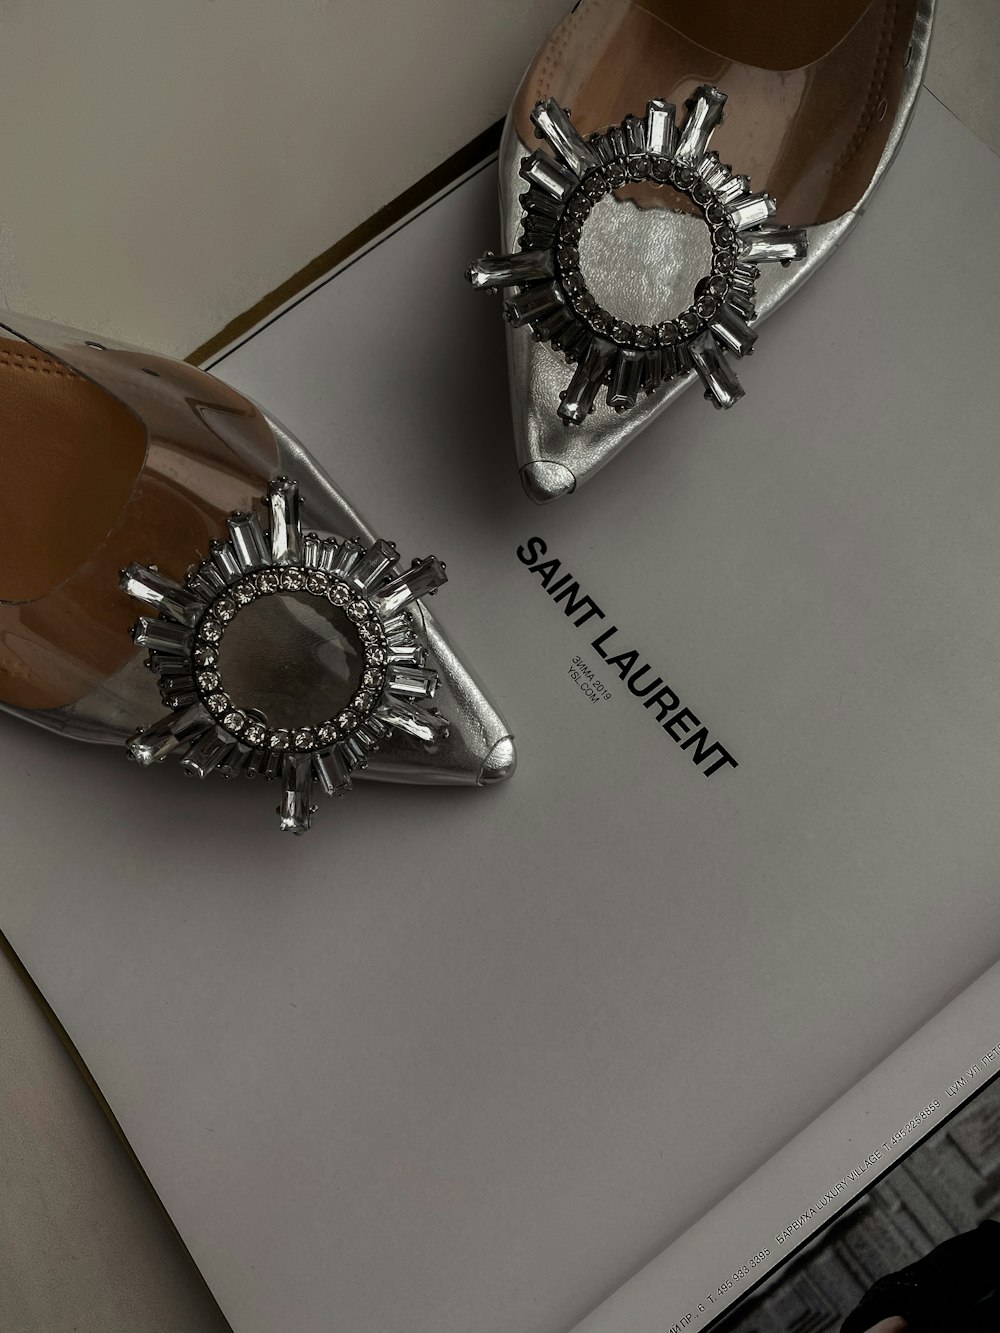 a pair of silver shoes sitting on top of a book